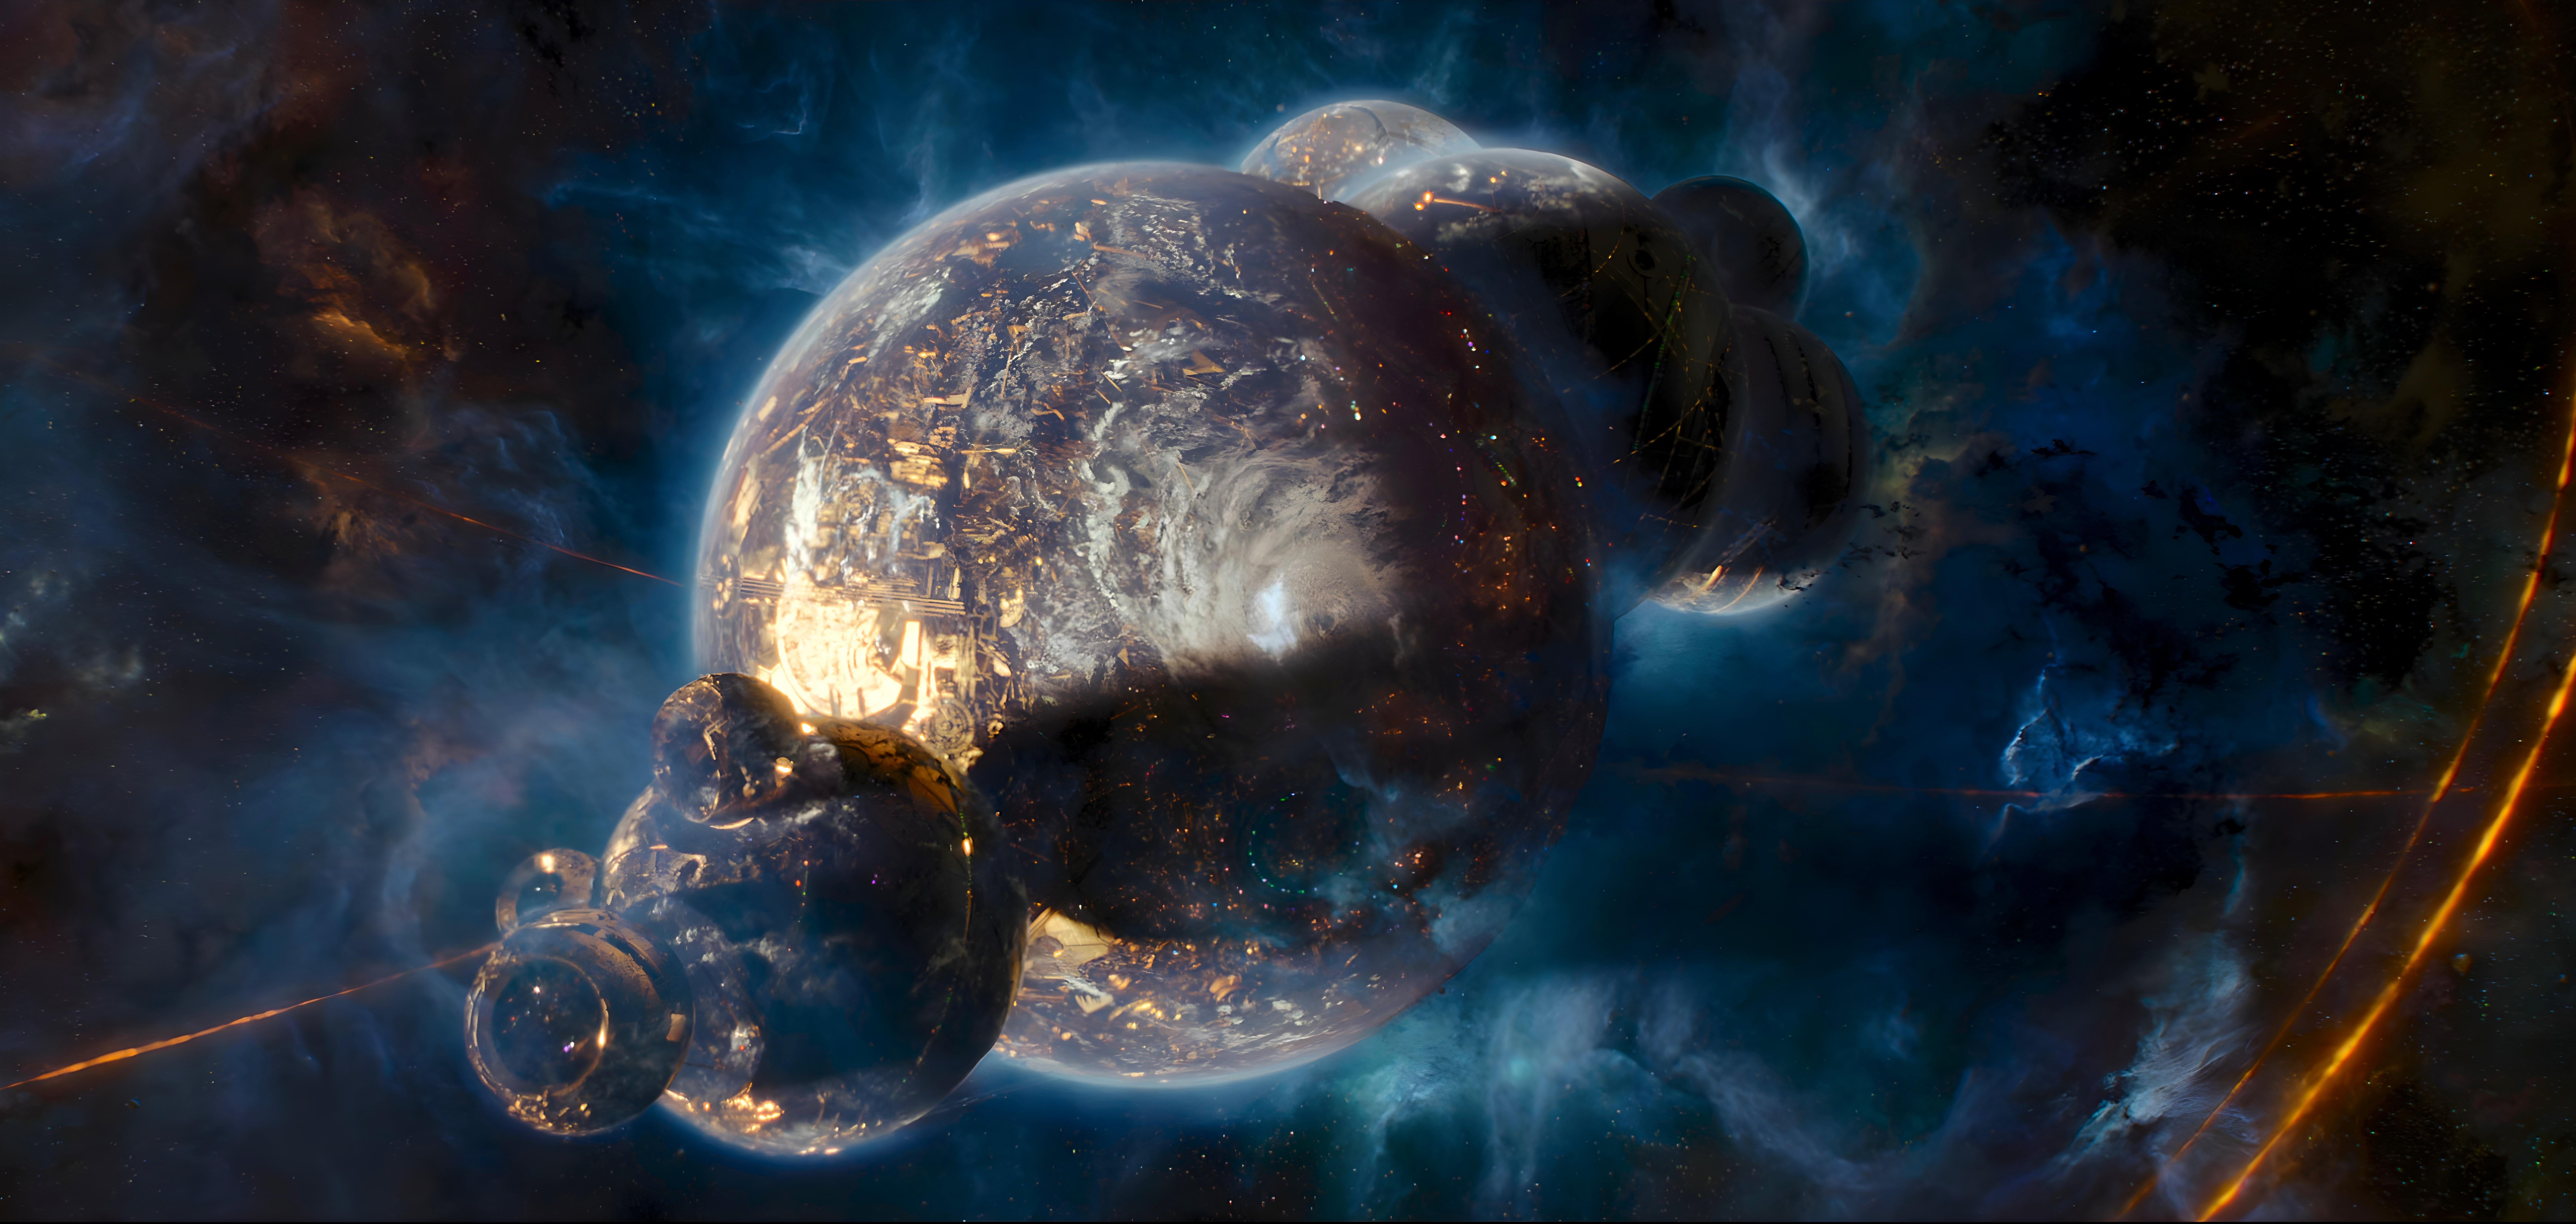 An artist's impression of a planet with rings of debris - Guardians of the Galaxy